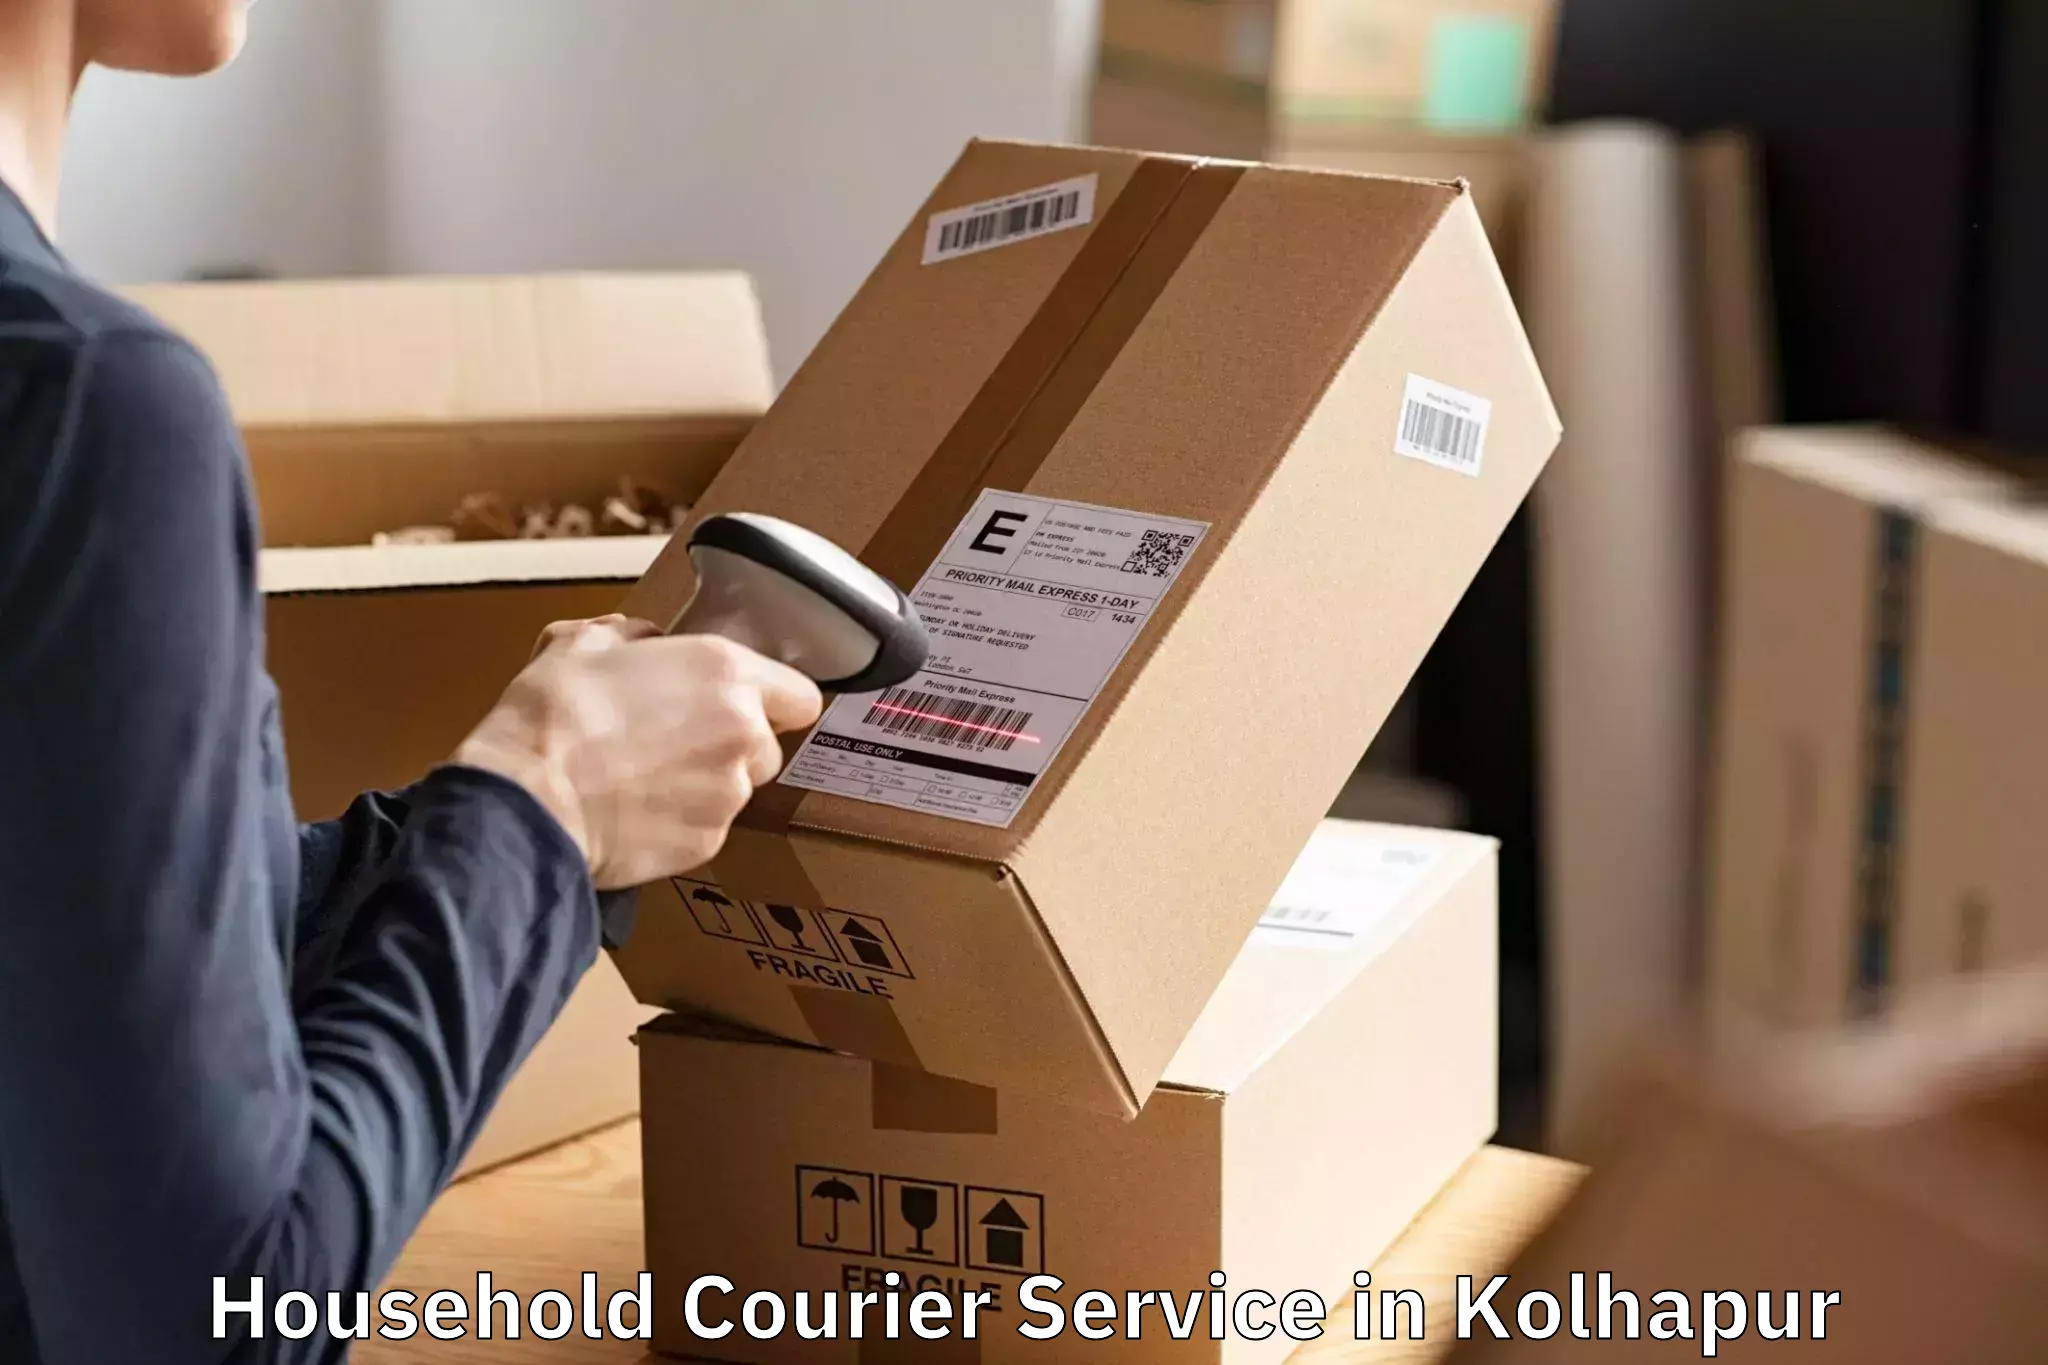 Easy Household Courier Service Booking in Kolhapur, Maharashtra (MH)